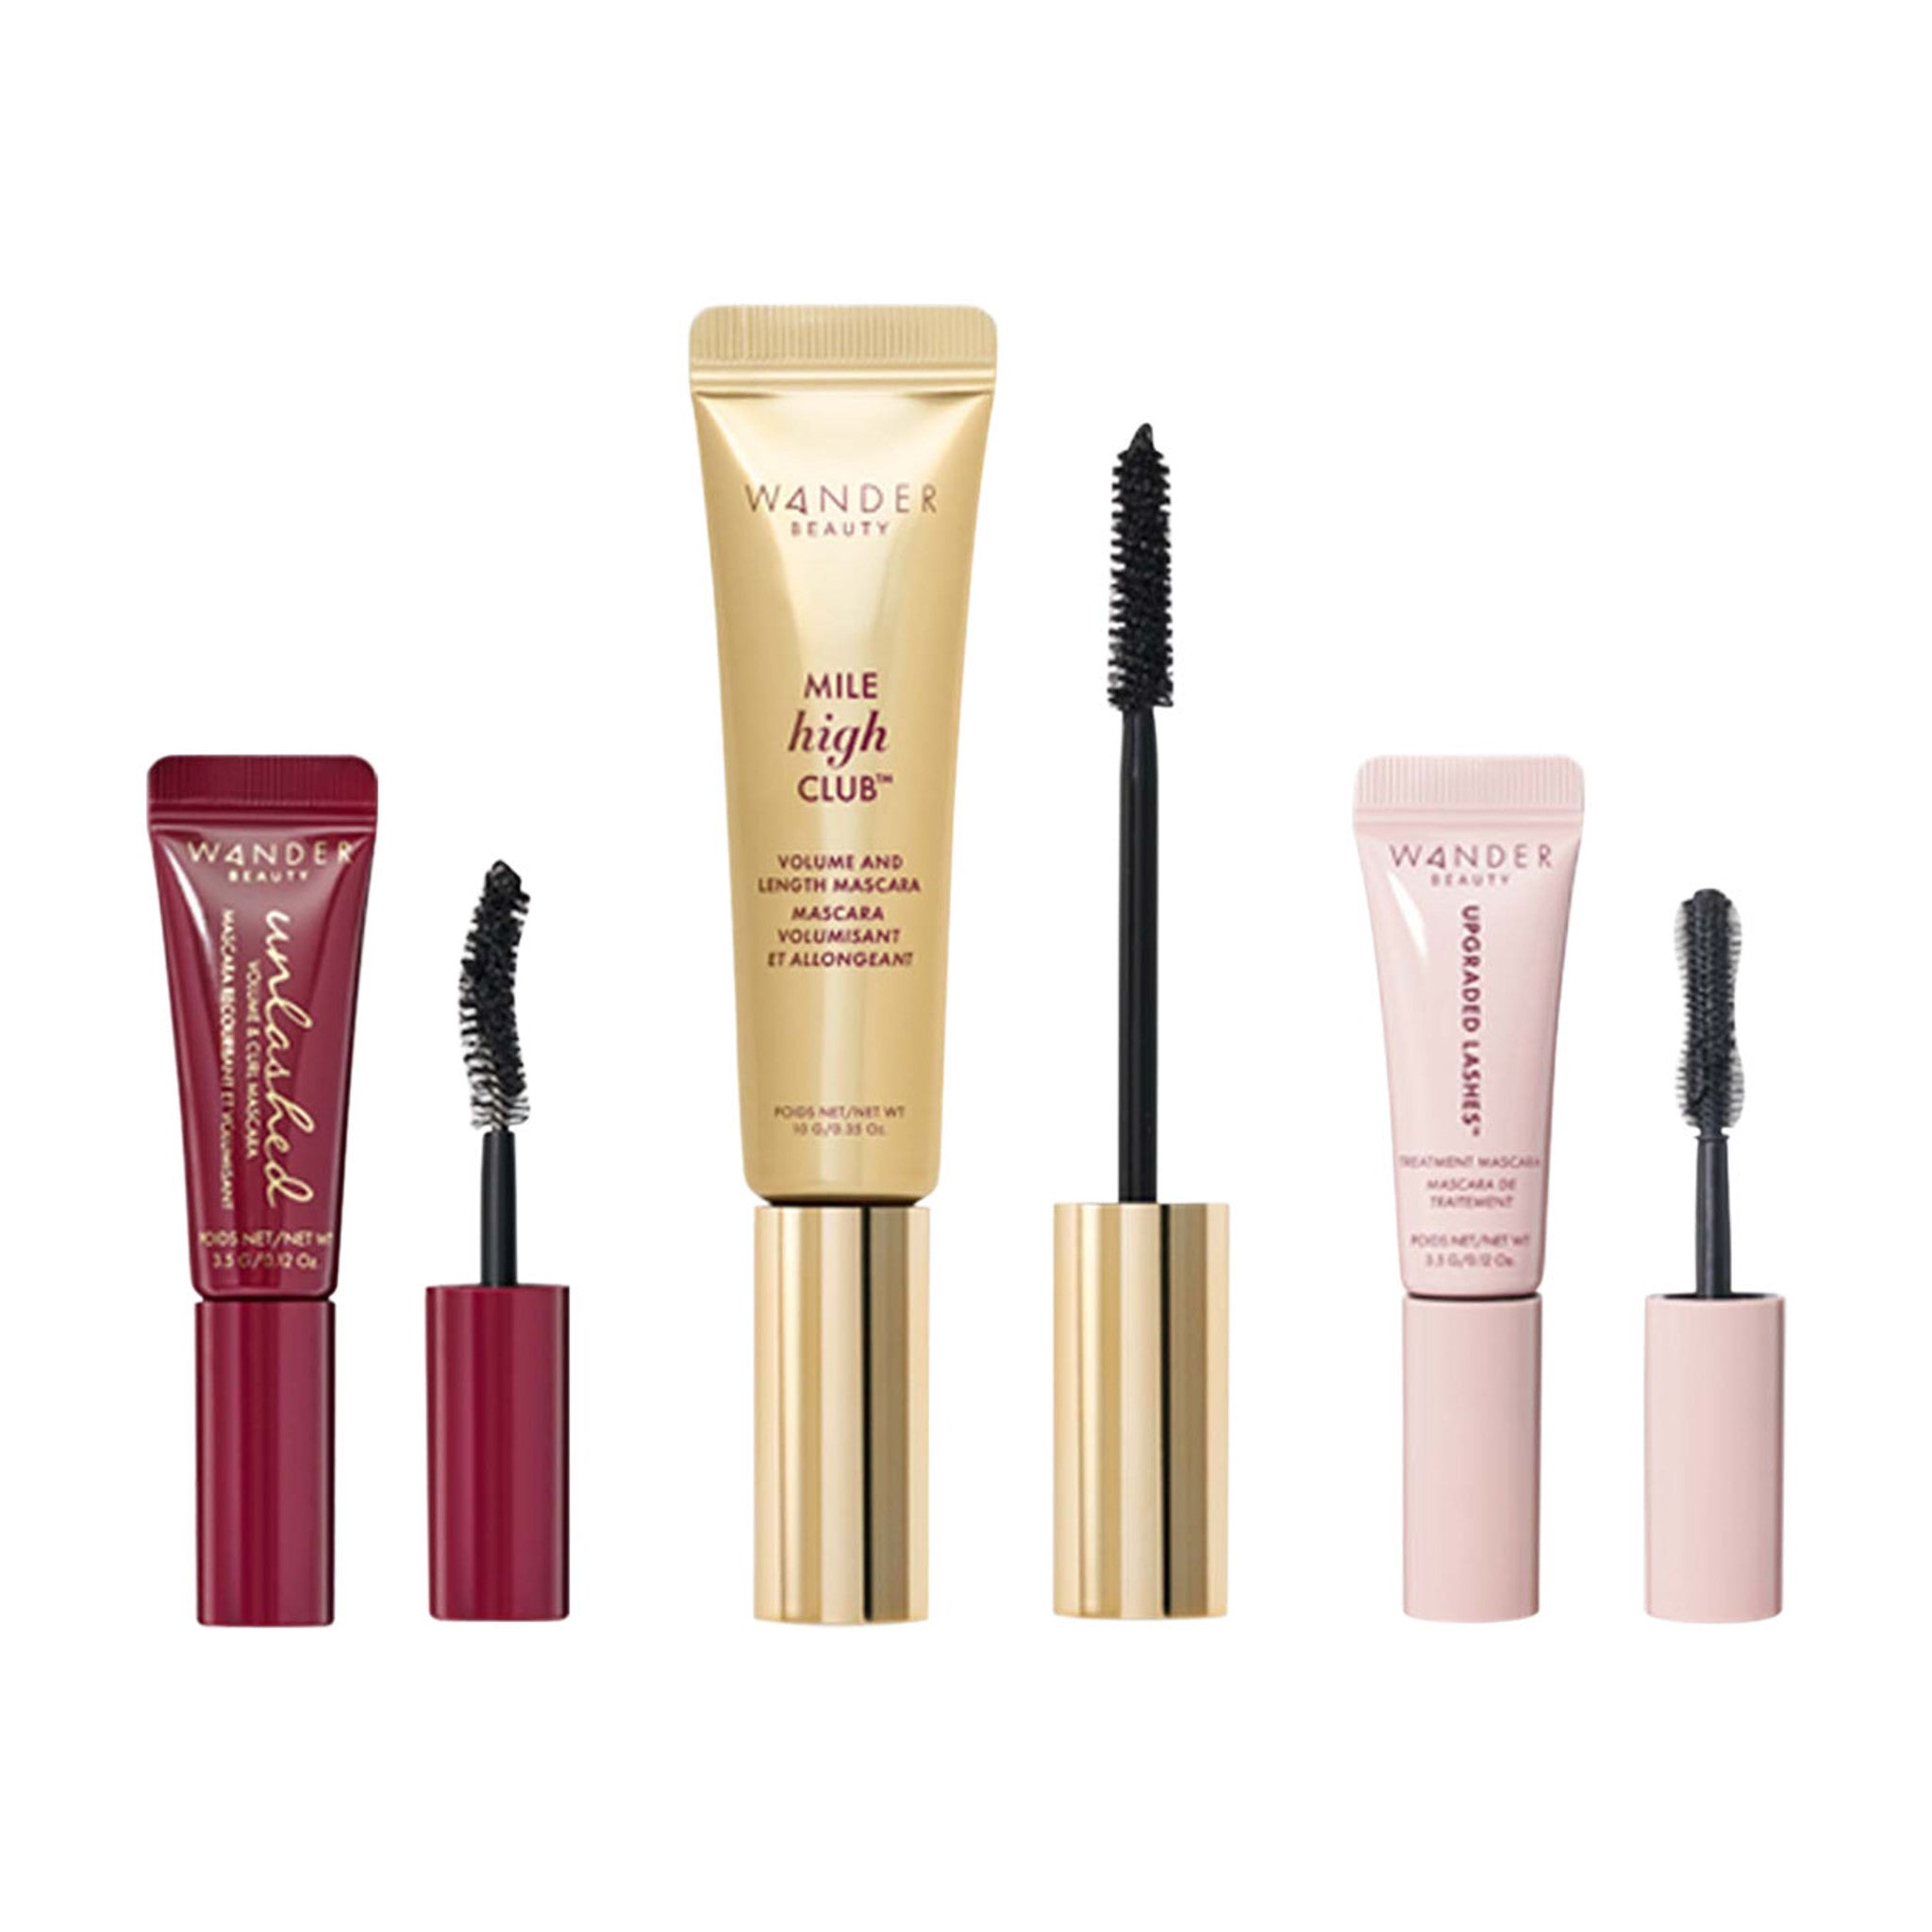 Wander Beauty Tasting Flight Mascara Kit main image. This product is in the color black